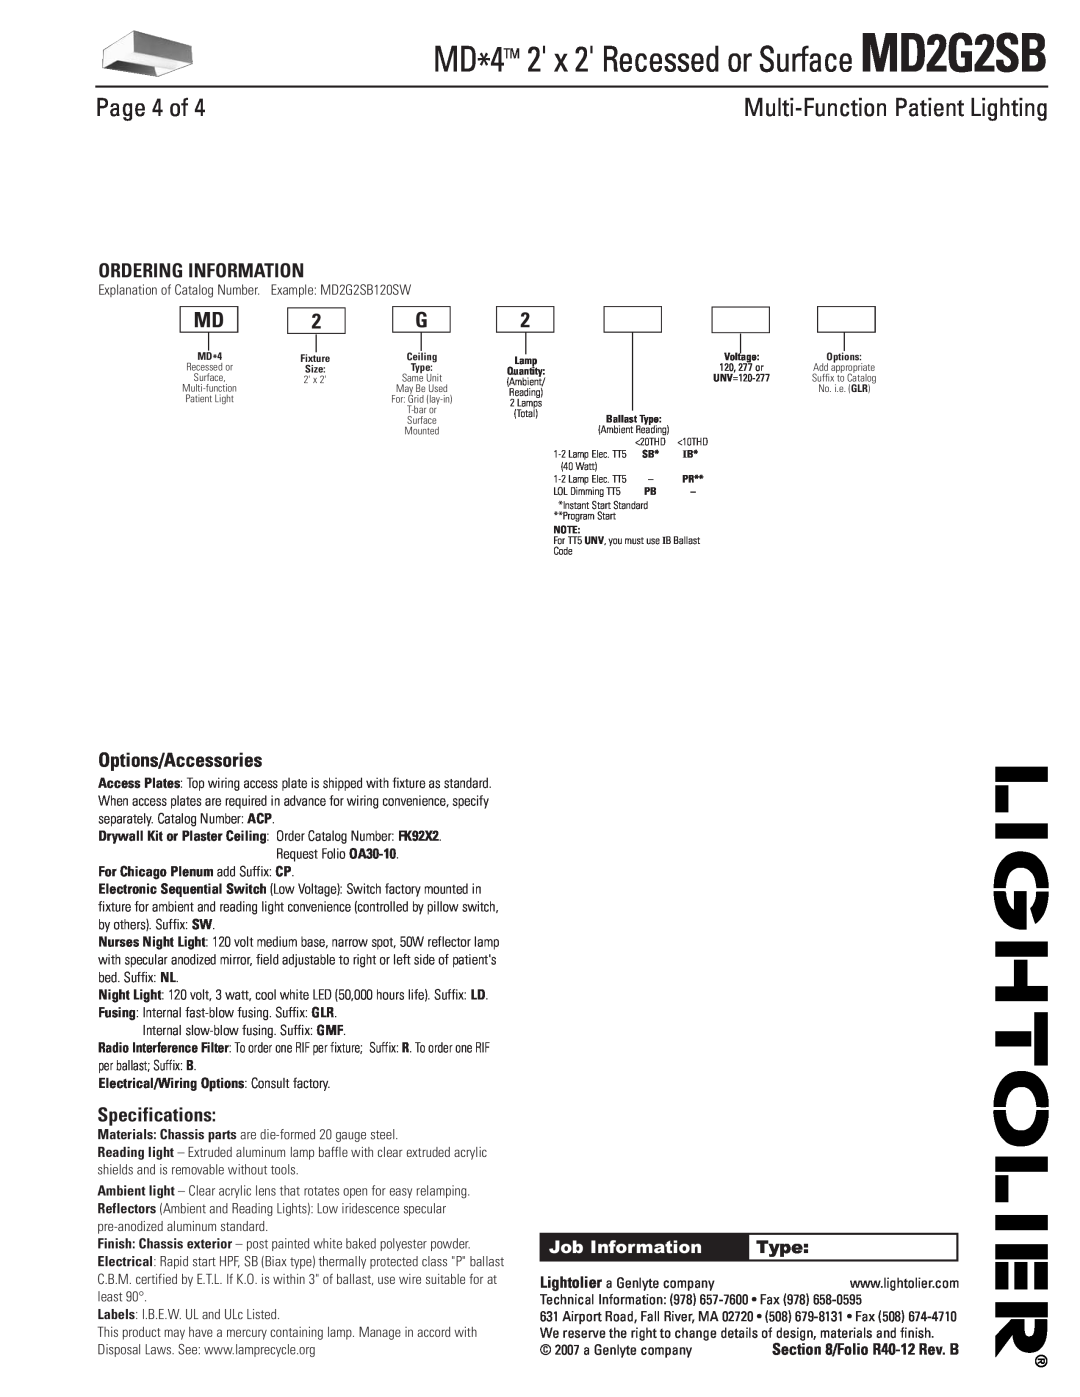 Lightolier MD2G2SB Page 4 of, Ordering Information, Options/Accessories, Specifications, Multi-FunctionPatient Lighting 